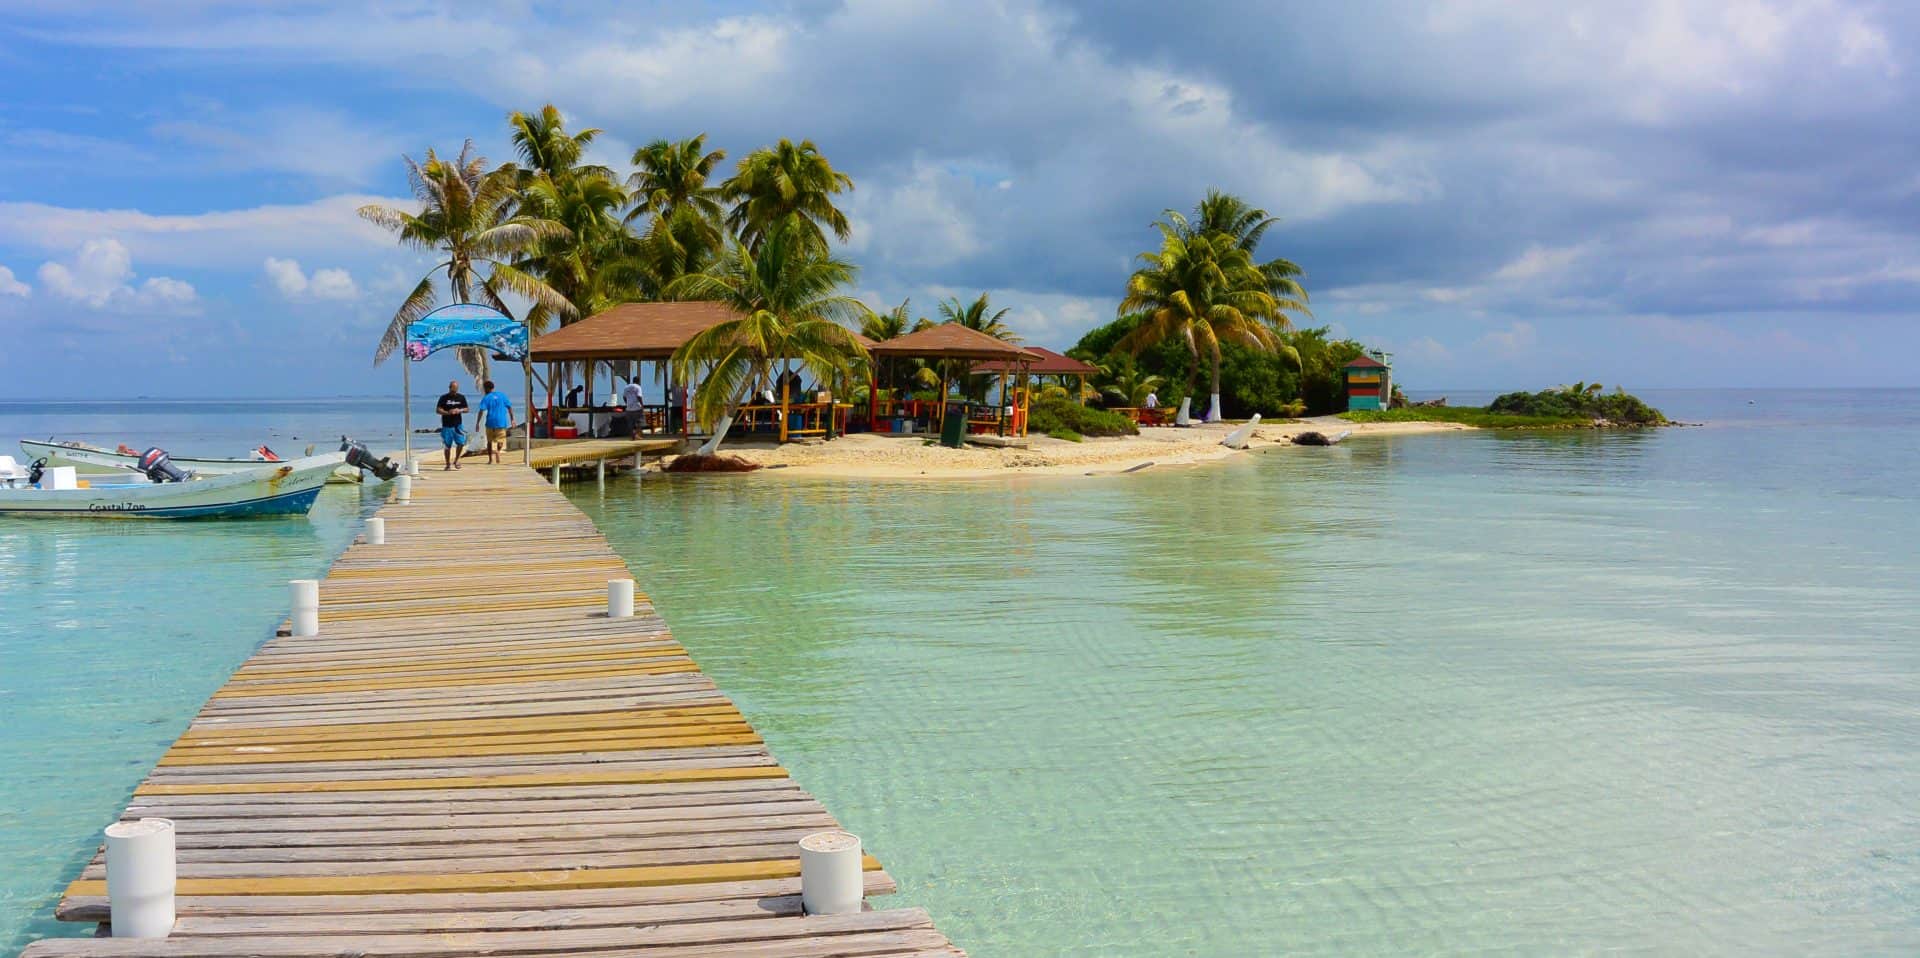 About Belize Cruise Excursions